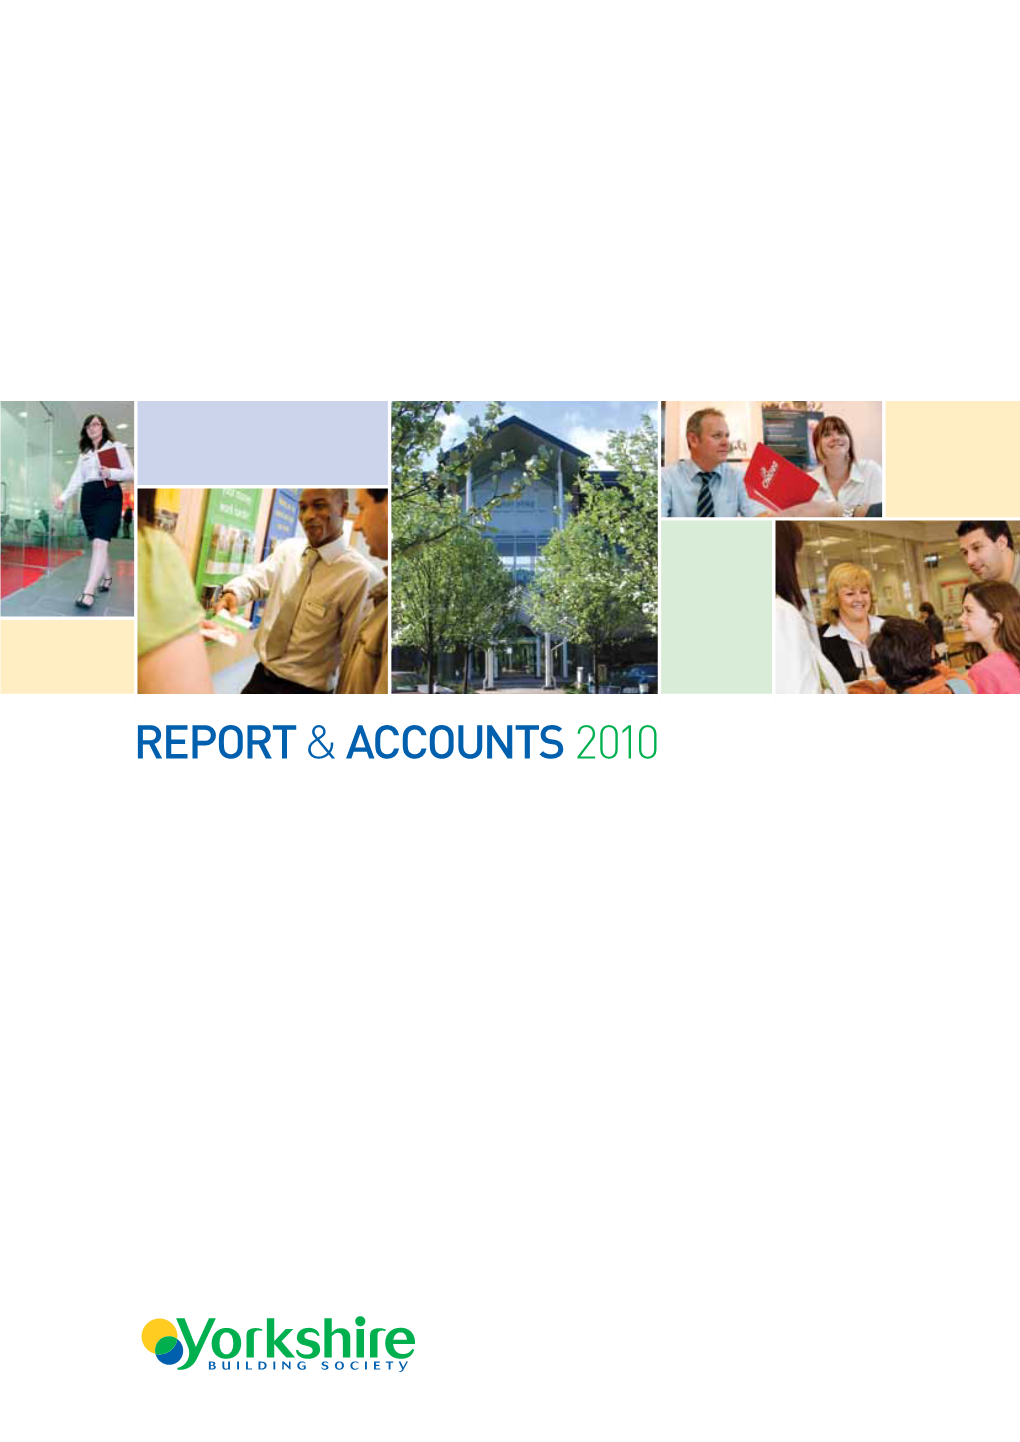 Annual Report and Accounts, 2010